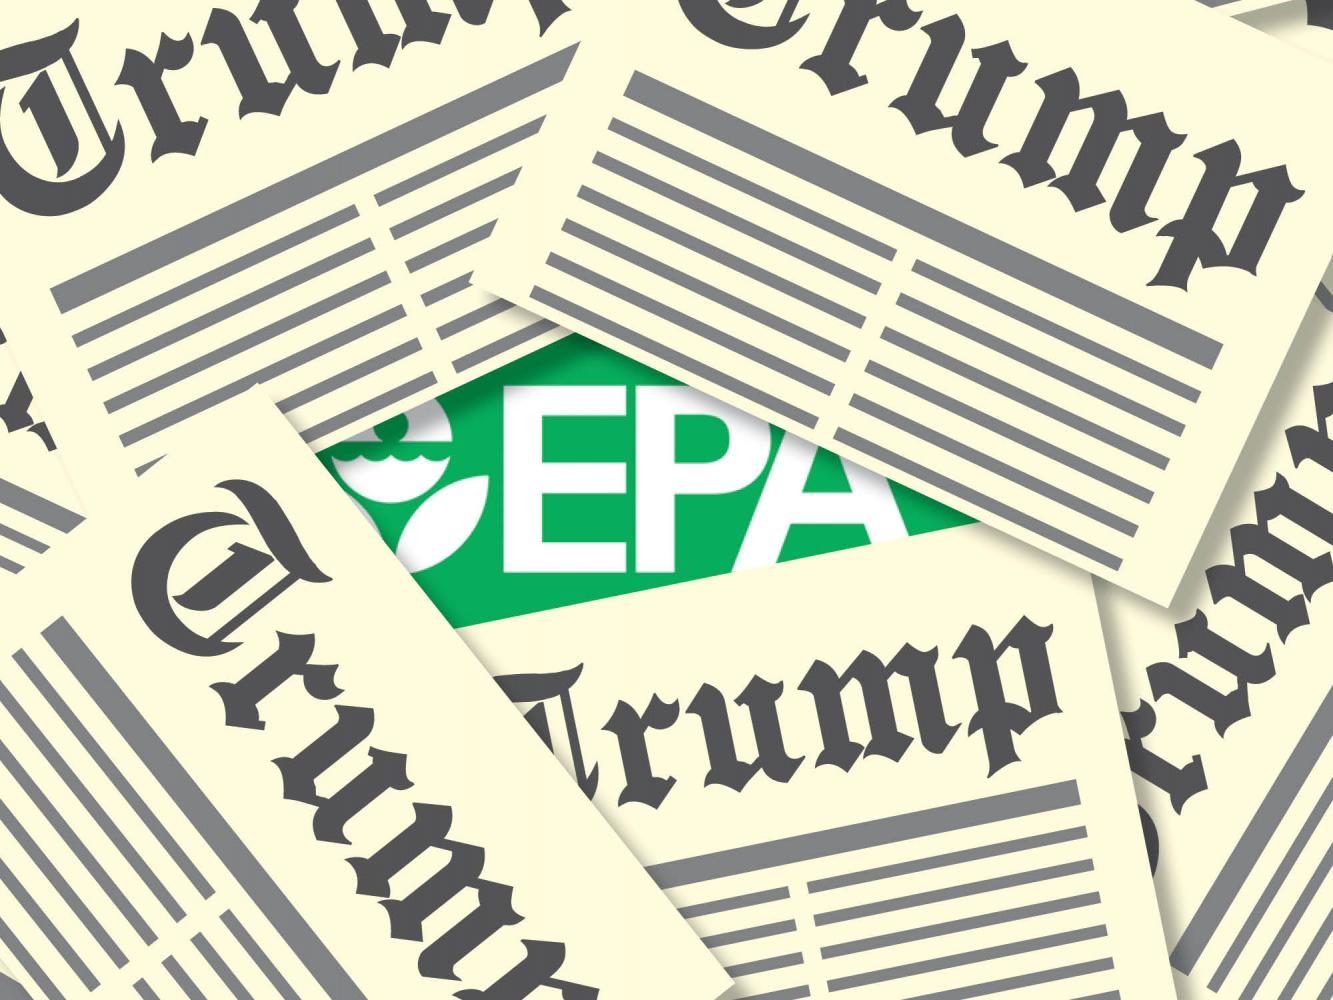 The news has been clogged up with exaggerated stories of how Trump is defunding the EPA.